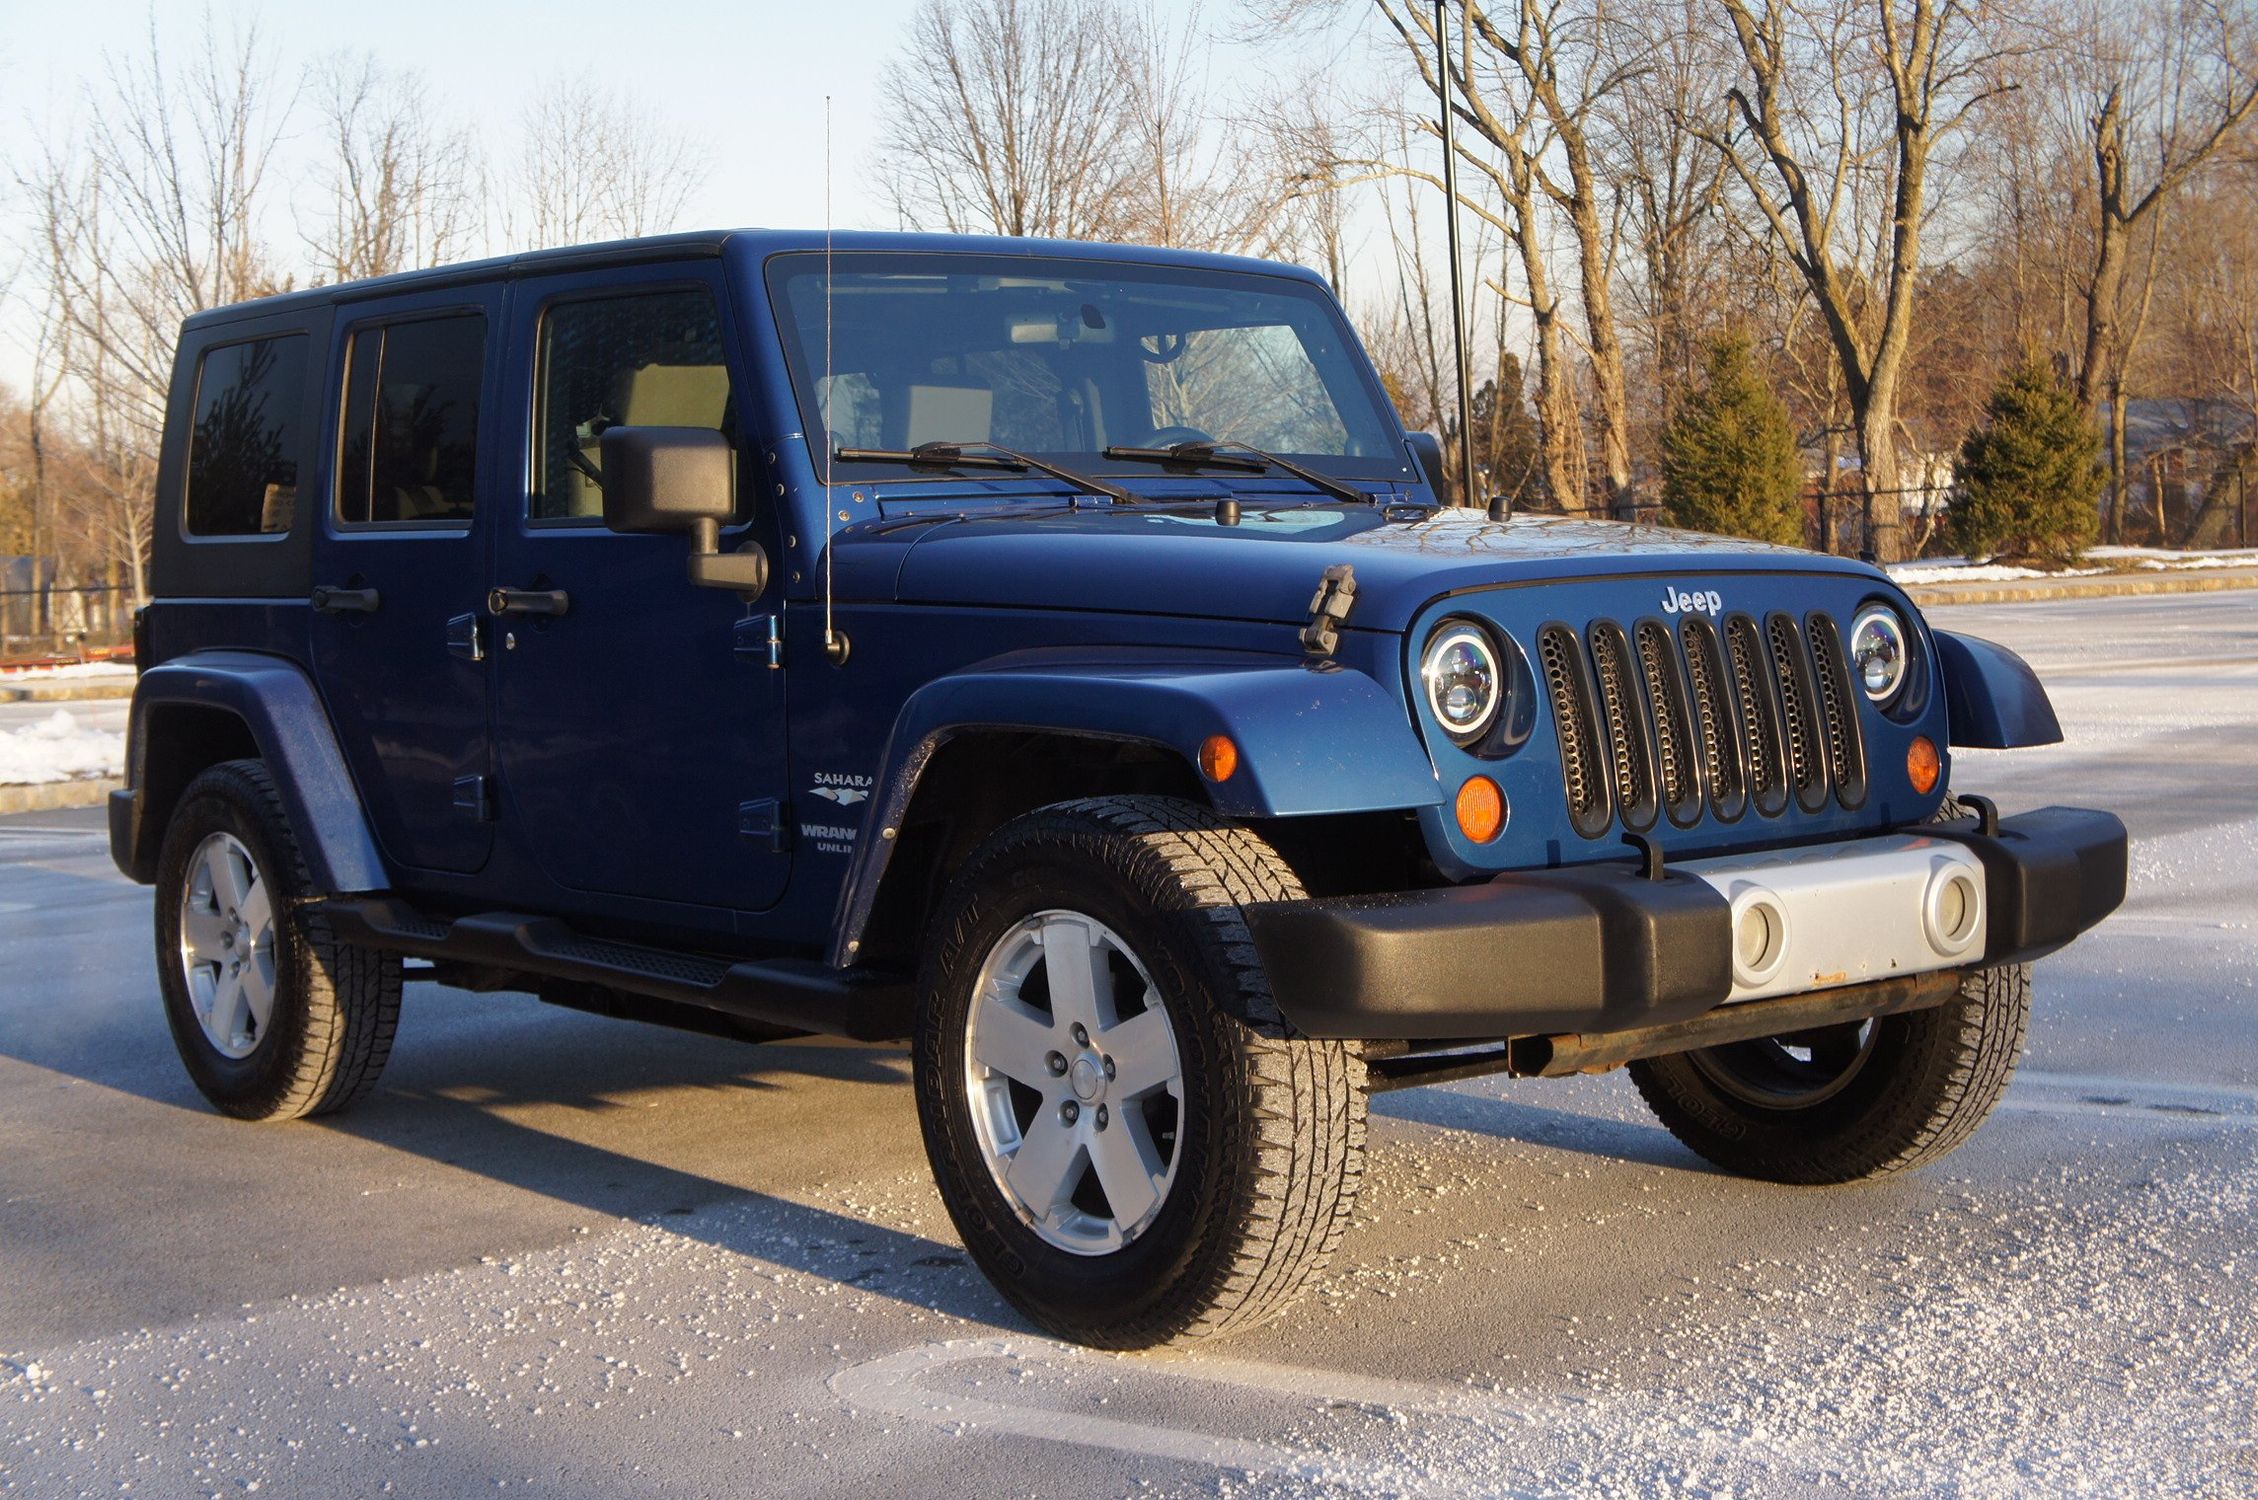 2009 Jeep Wrangler Unlimited Sahara | Zoom Auto Group - Used Cars New Jersey